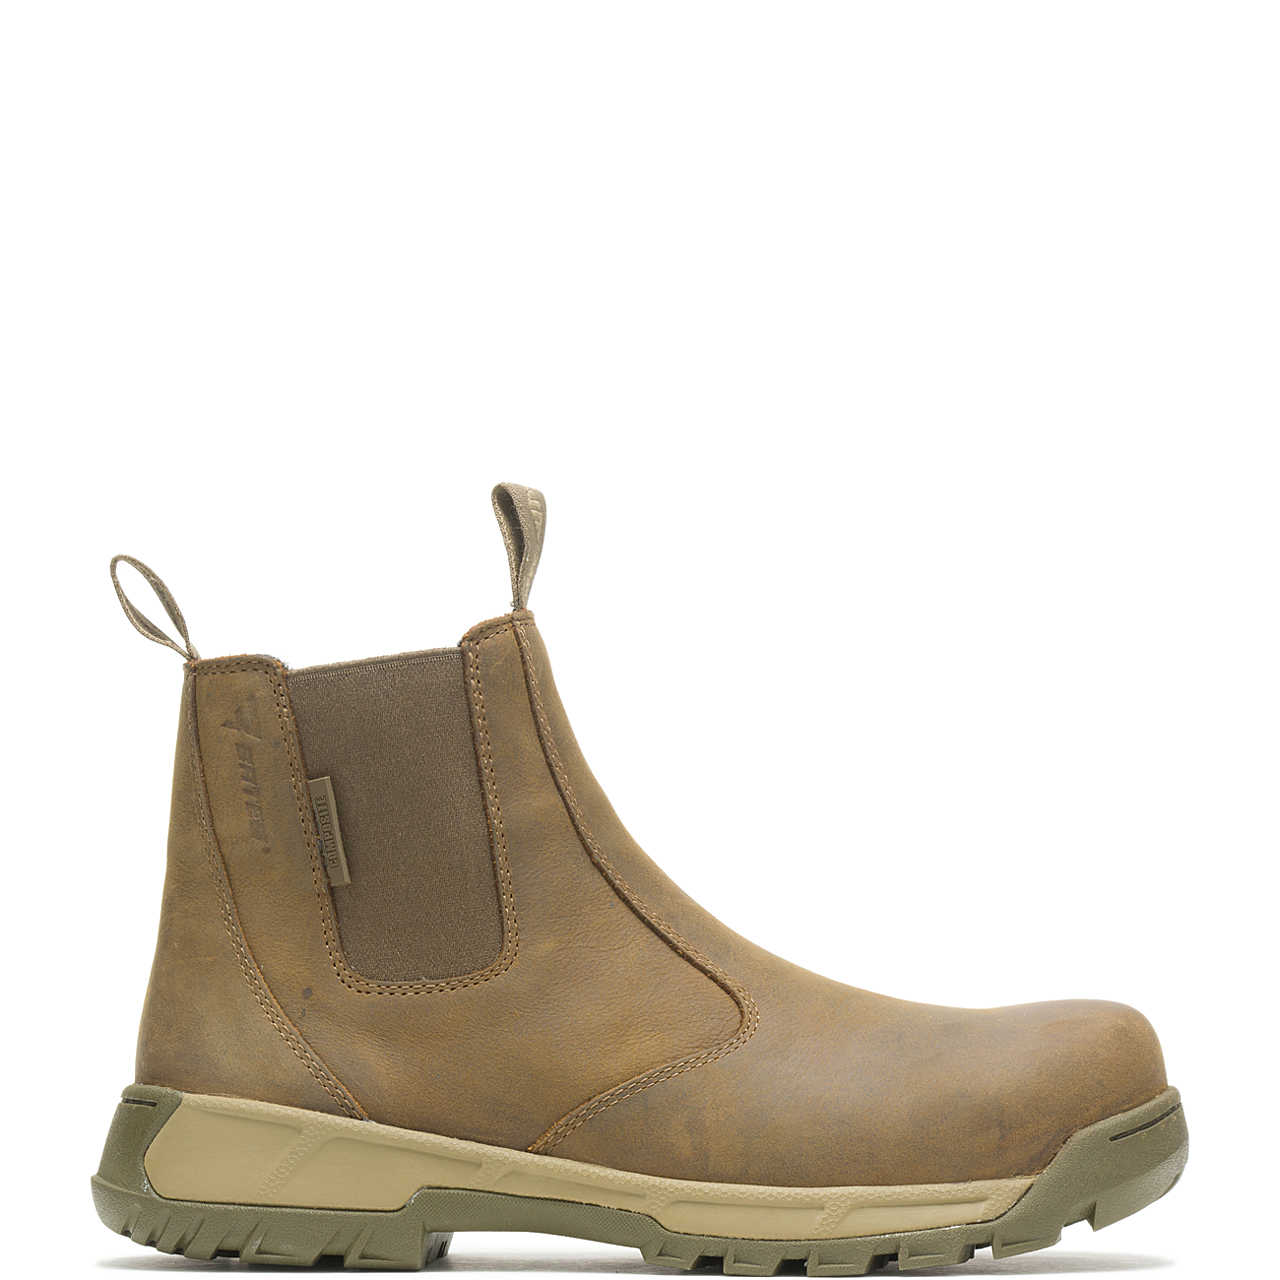 Bates Footwear: Men's Tactical Sport 2 Station Boot $56 + Free Shipping on $75+